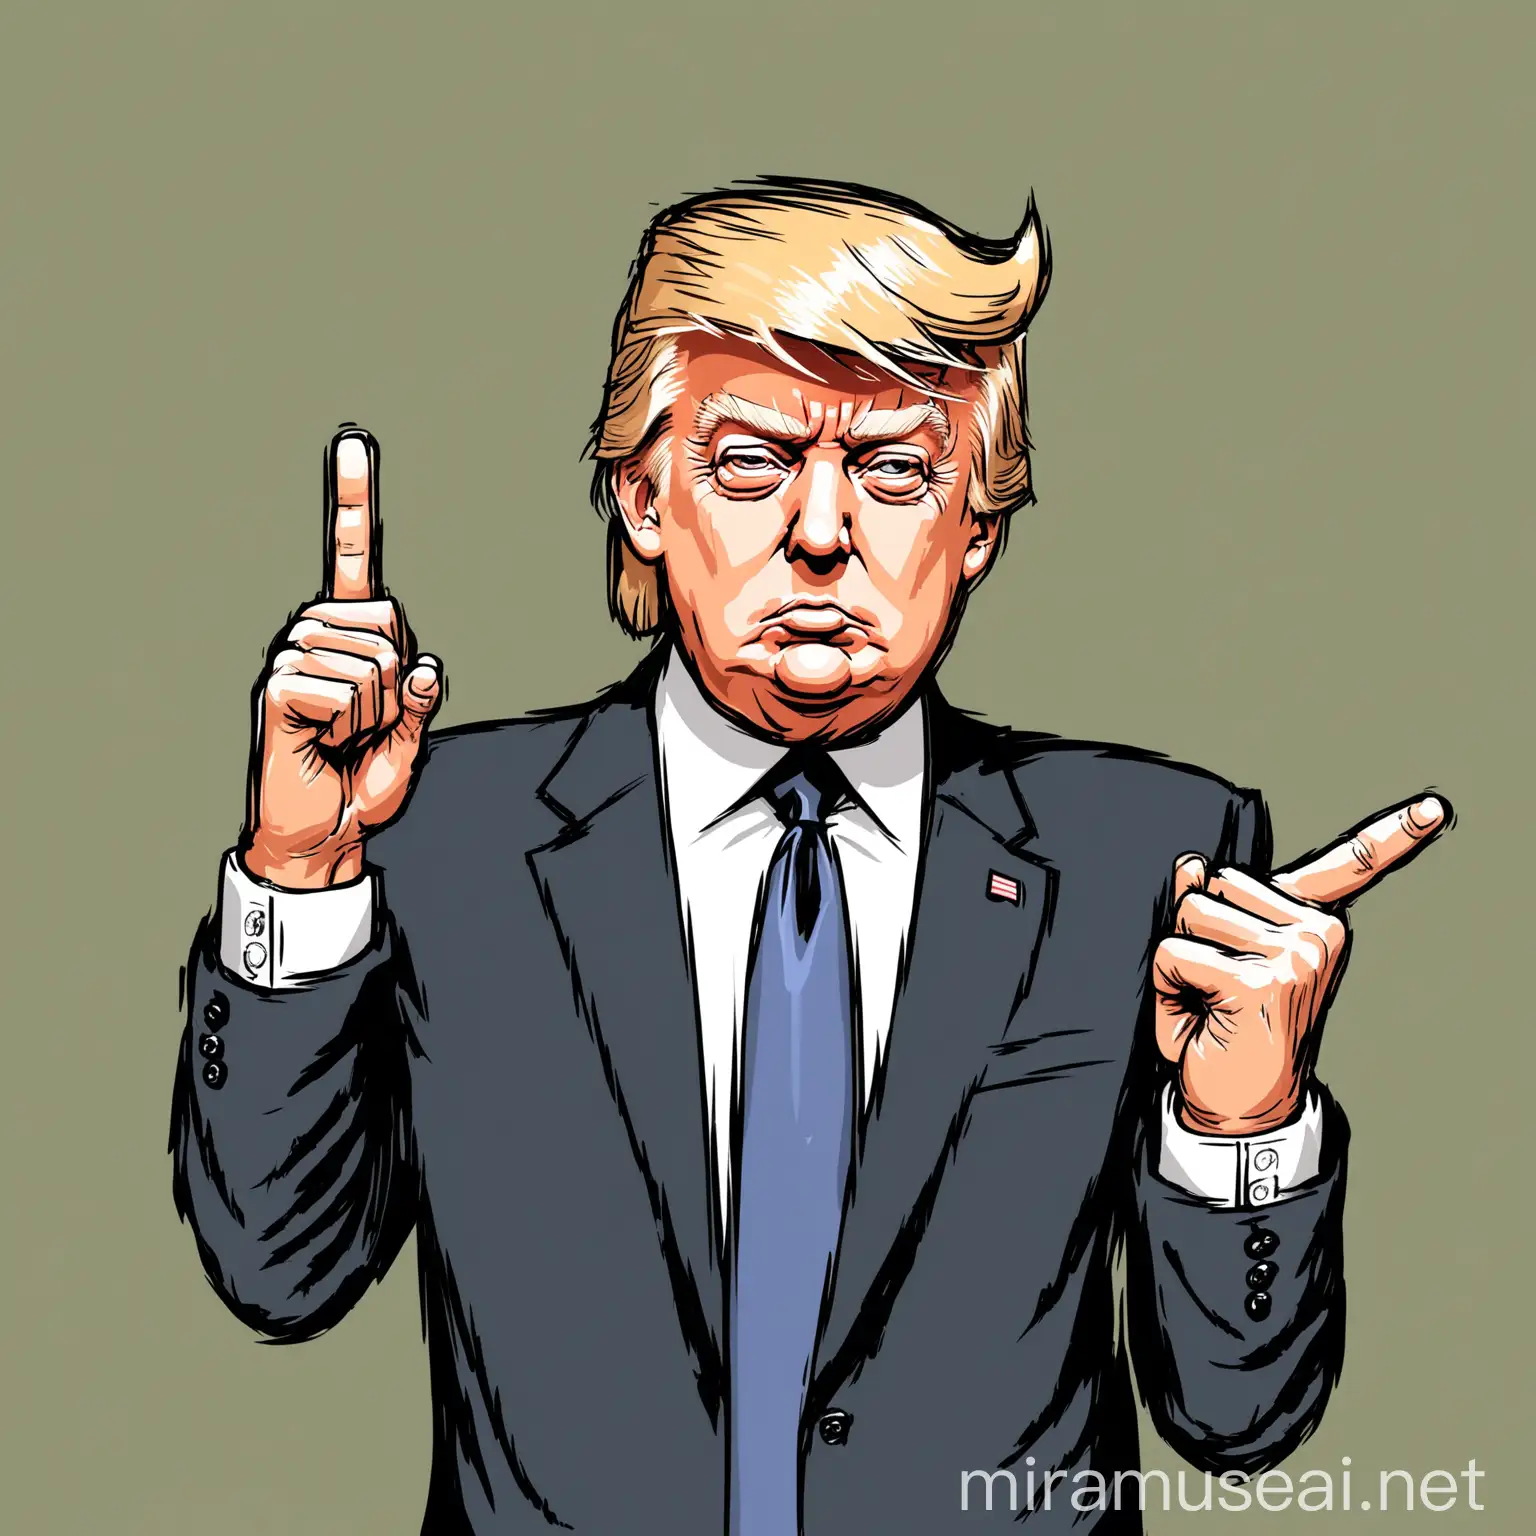 Controversial Gesture Donald Trump Illustration Showing Middle Fingers